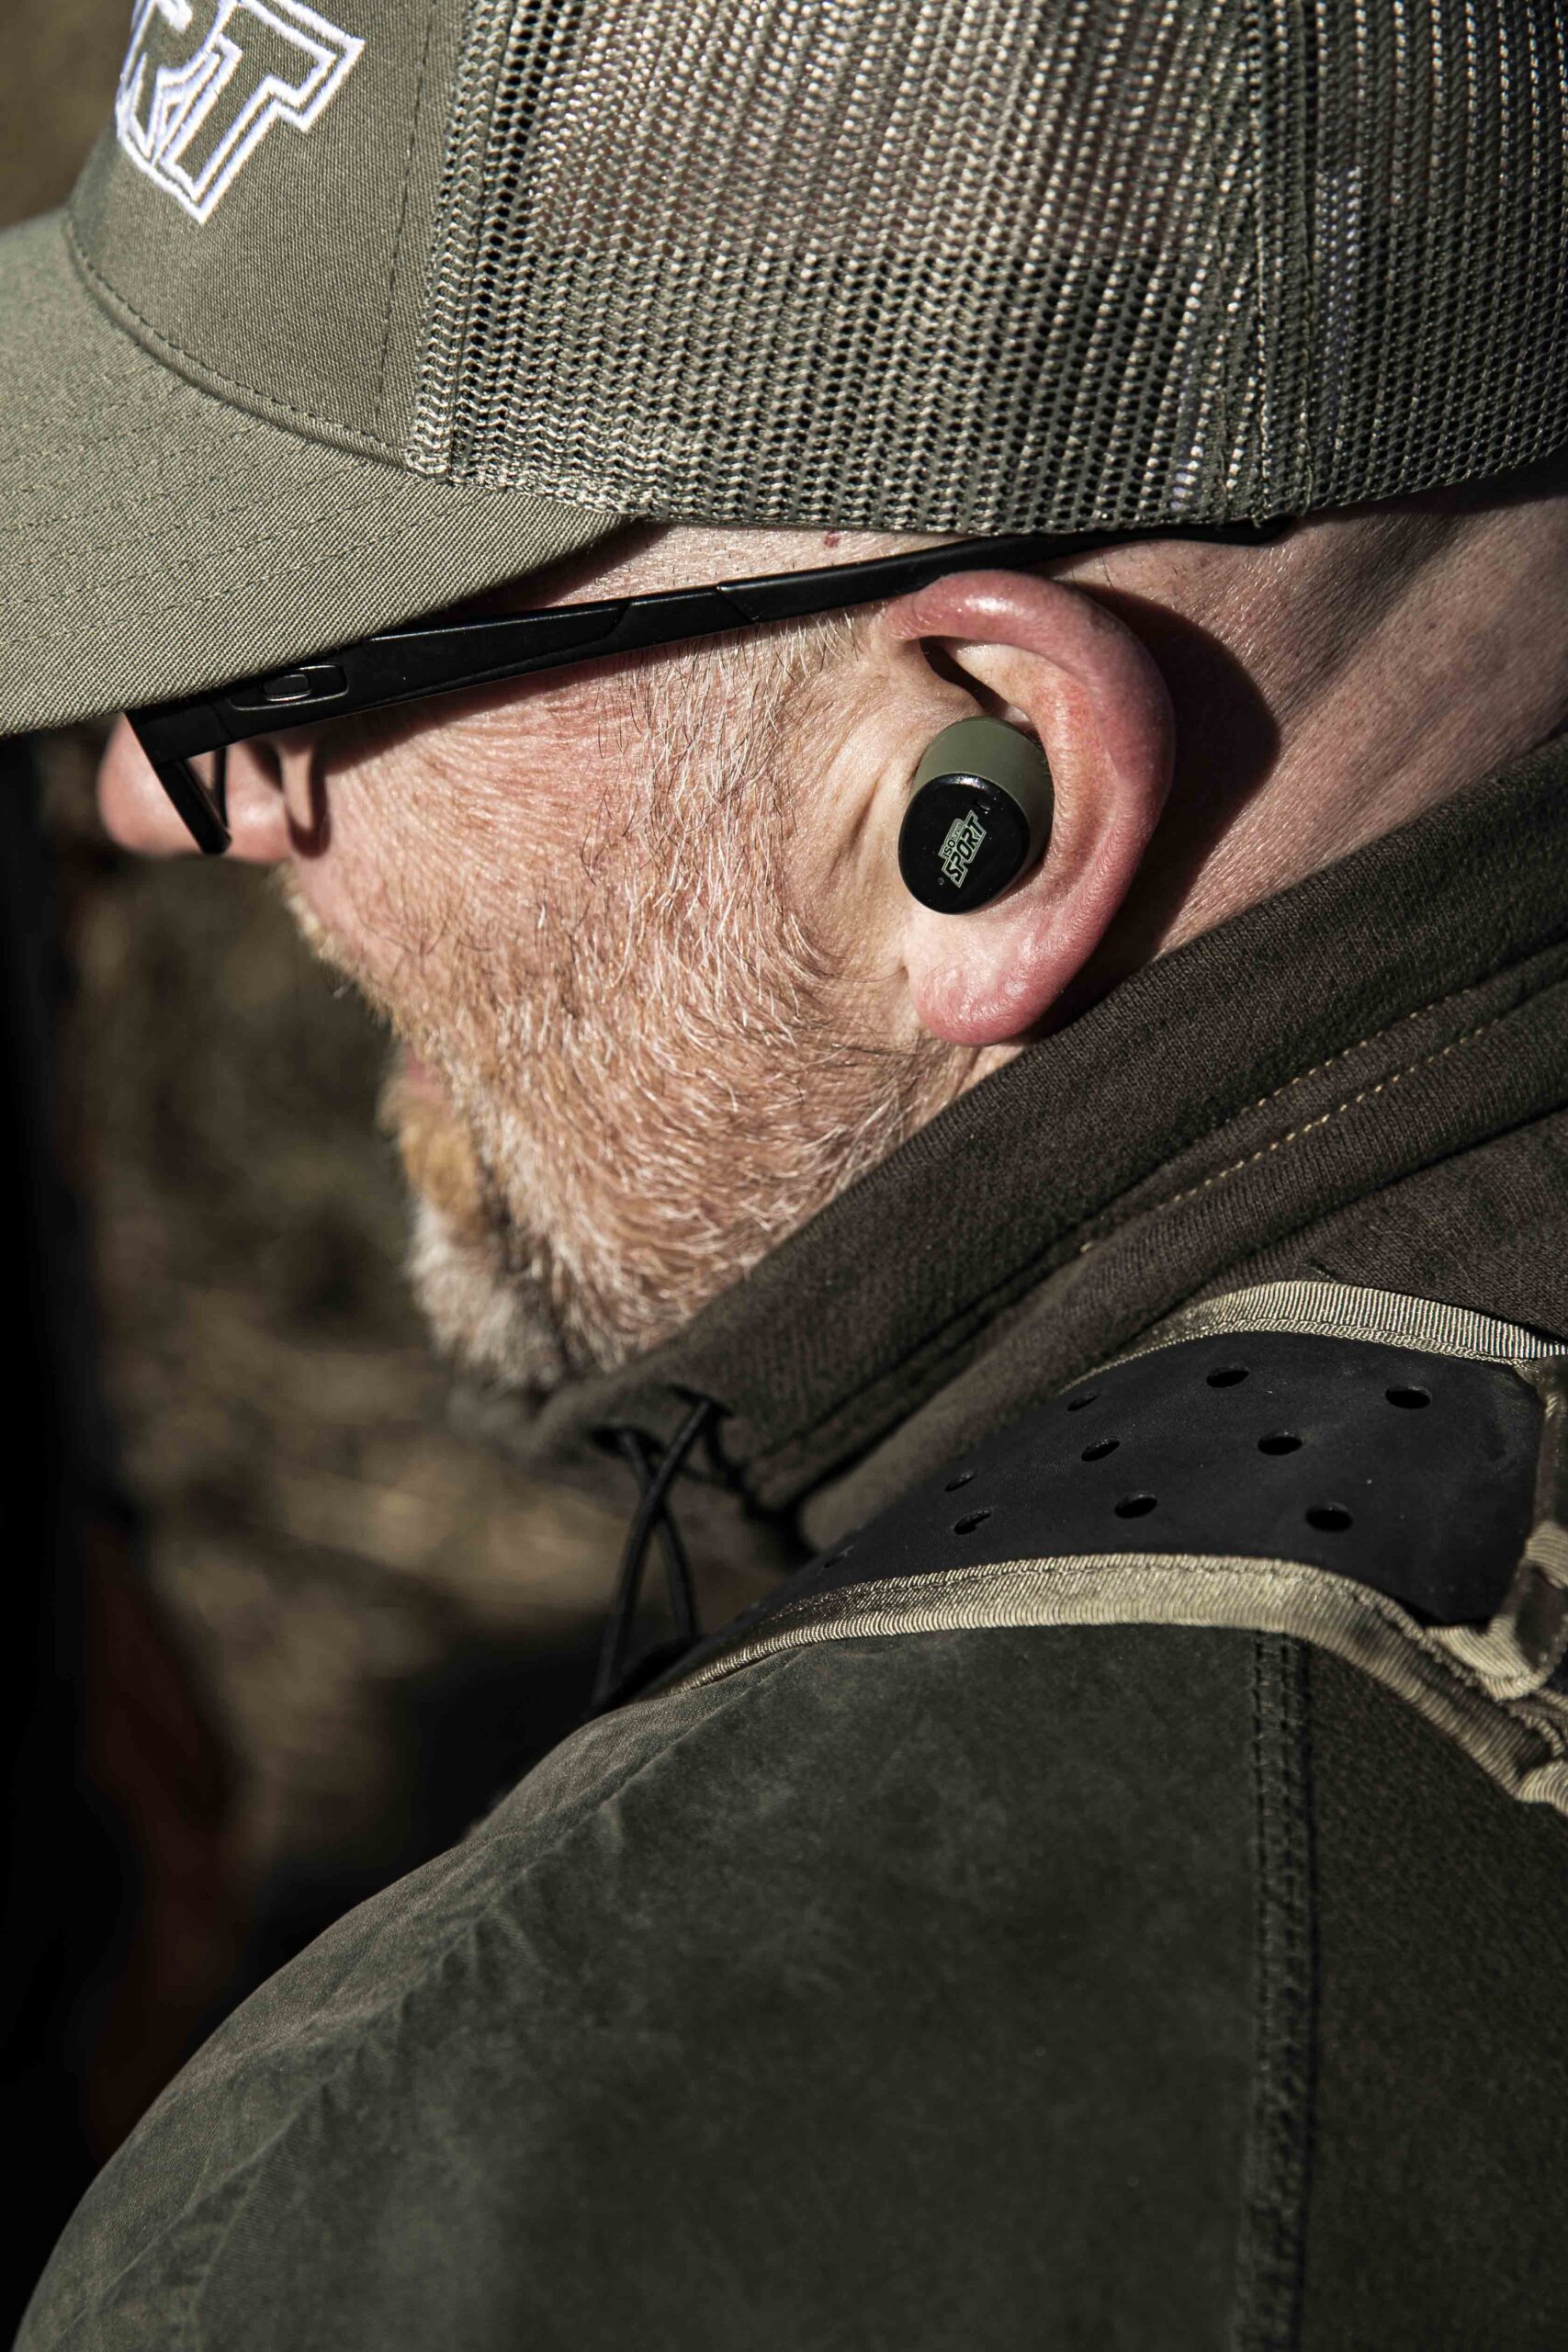 Gift ISOtunes Sport’s CALIBER Noise-Isolating Earbuds